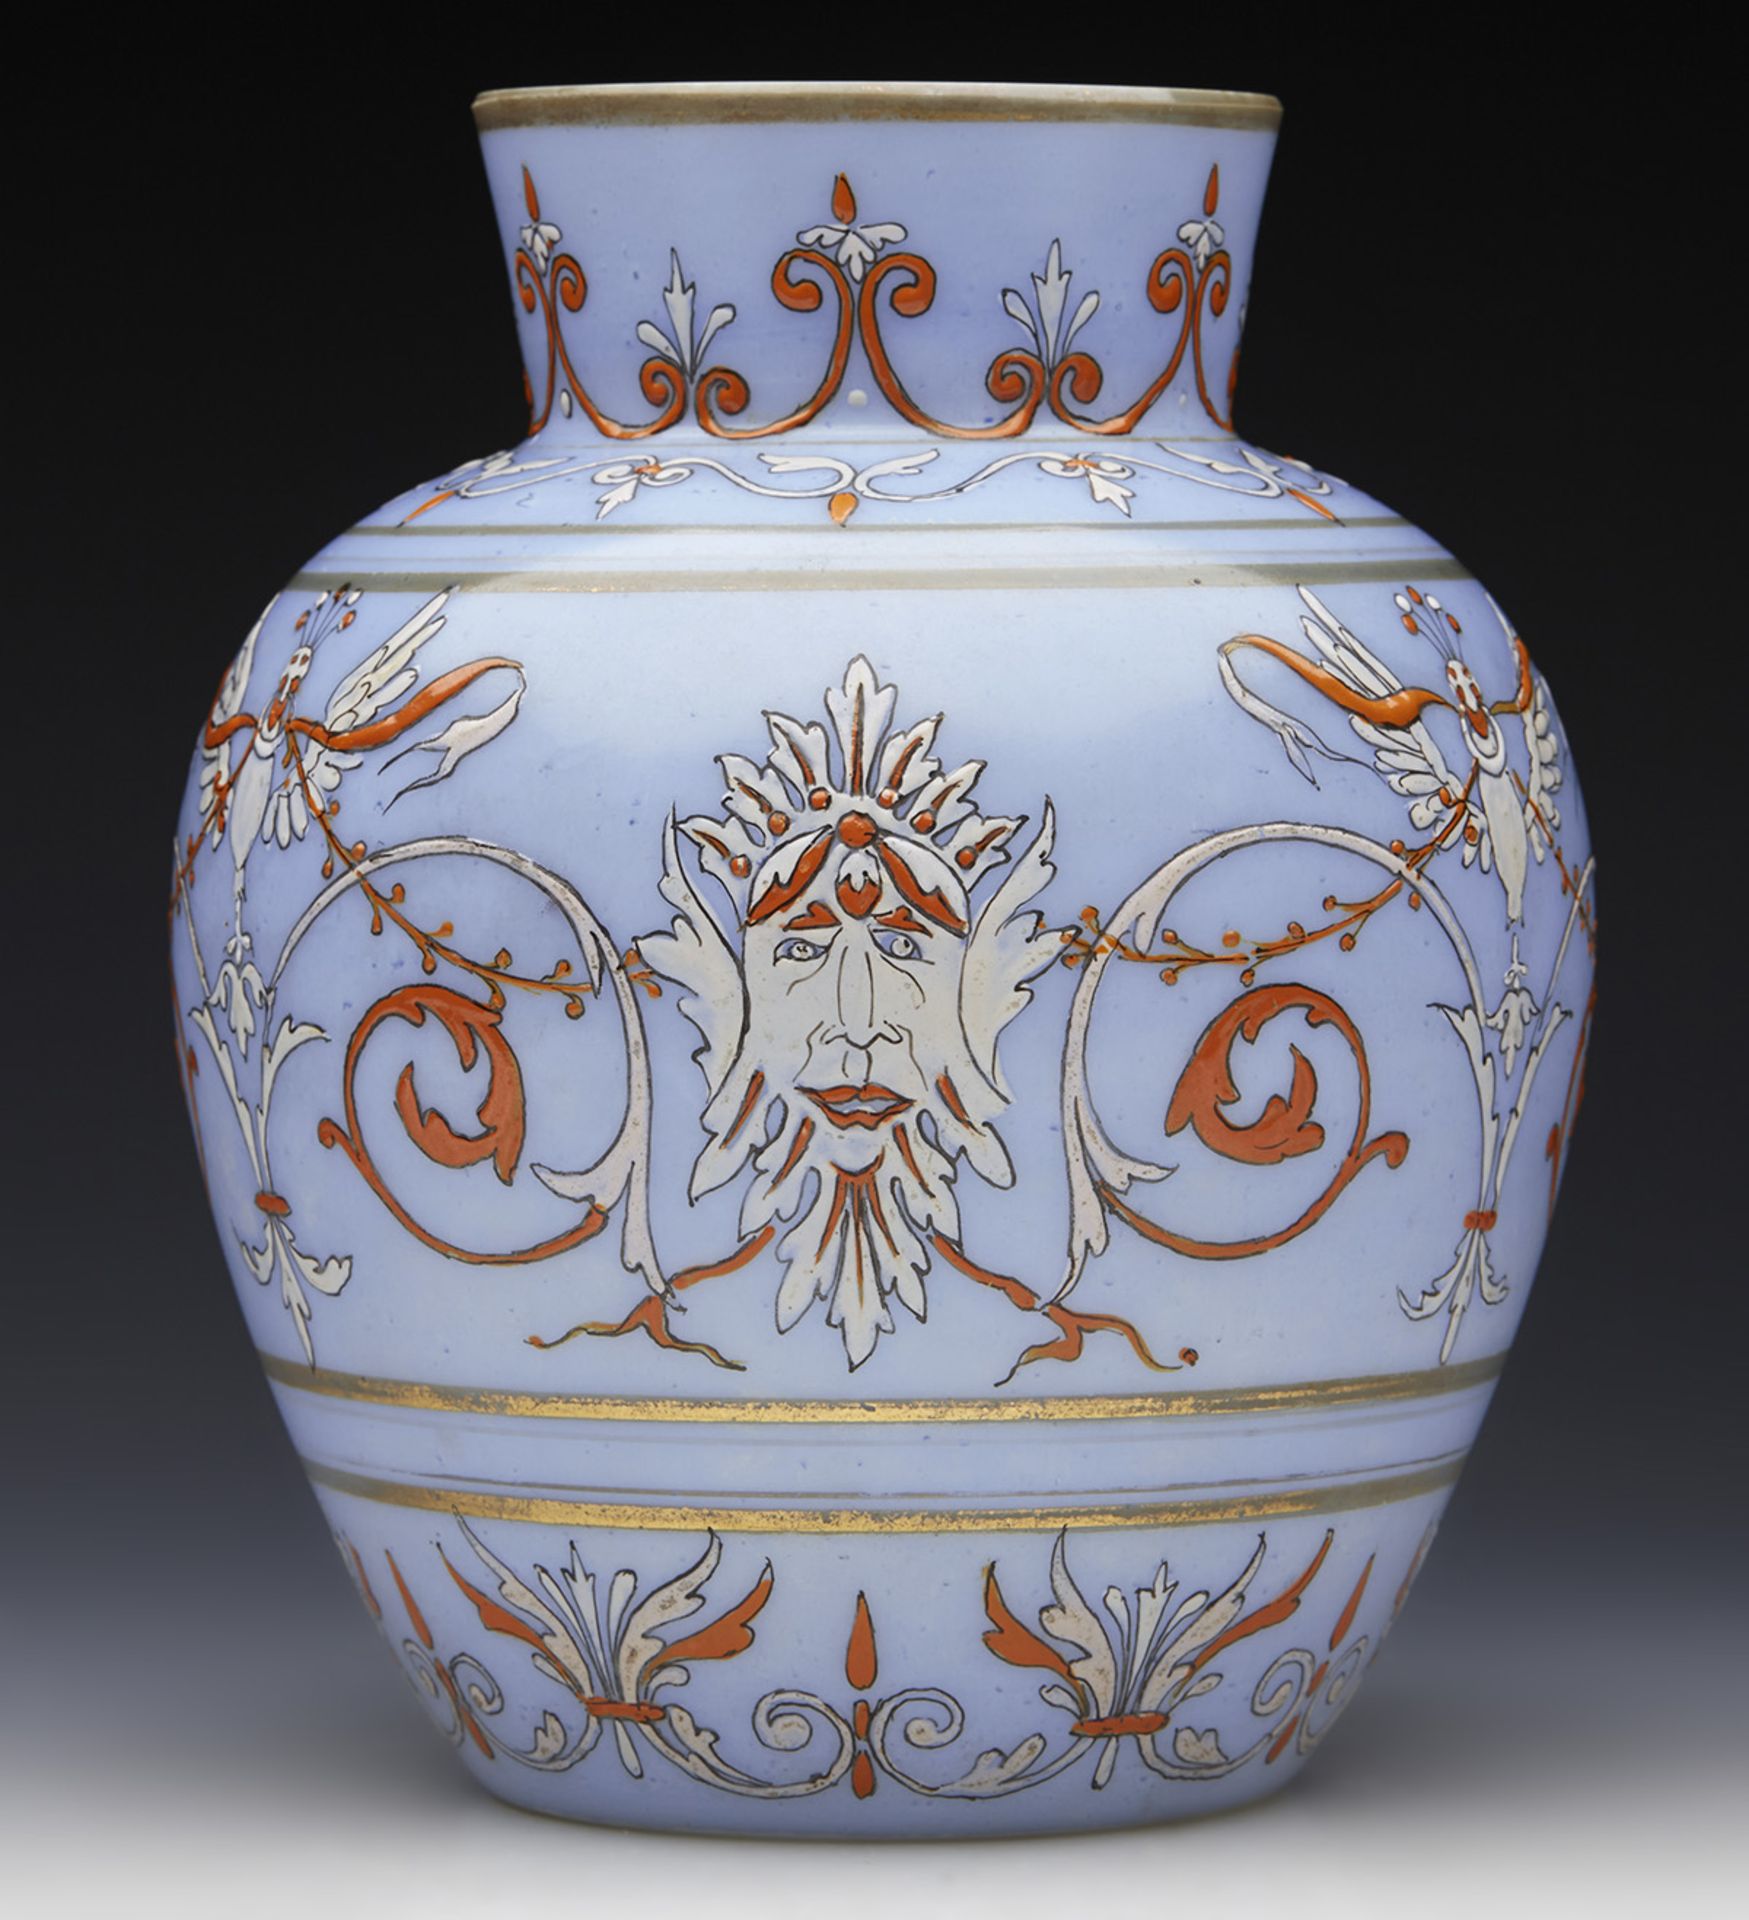 Antique Continental Enameled Glass Vase 19Th C. - Image 5 of 10